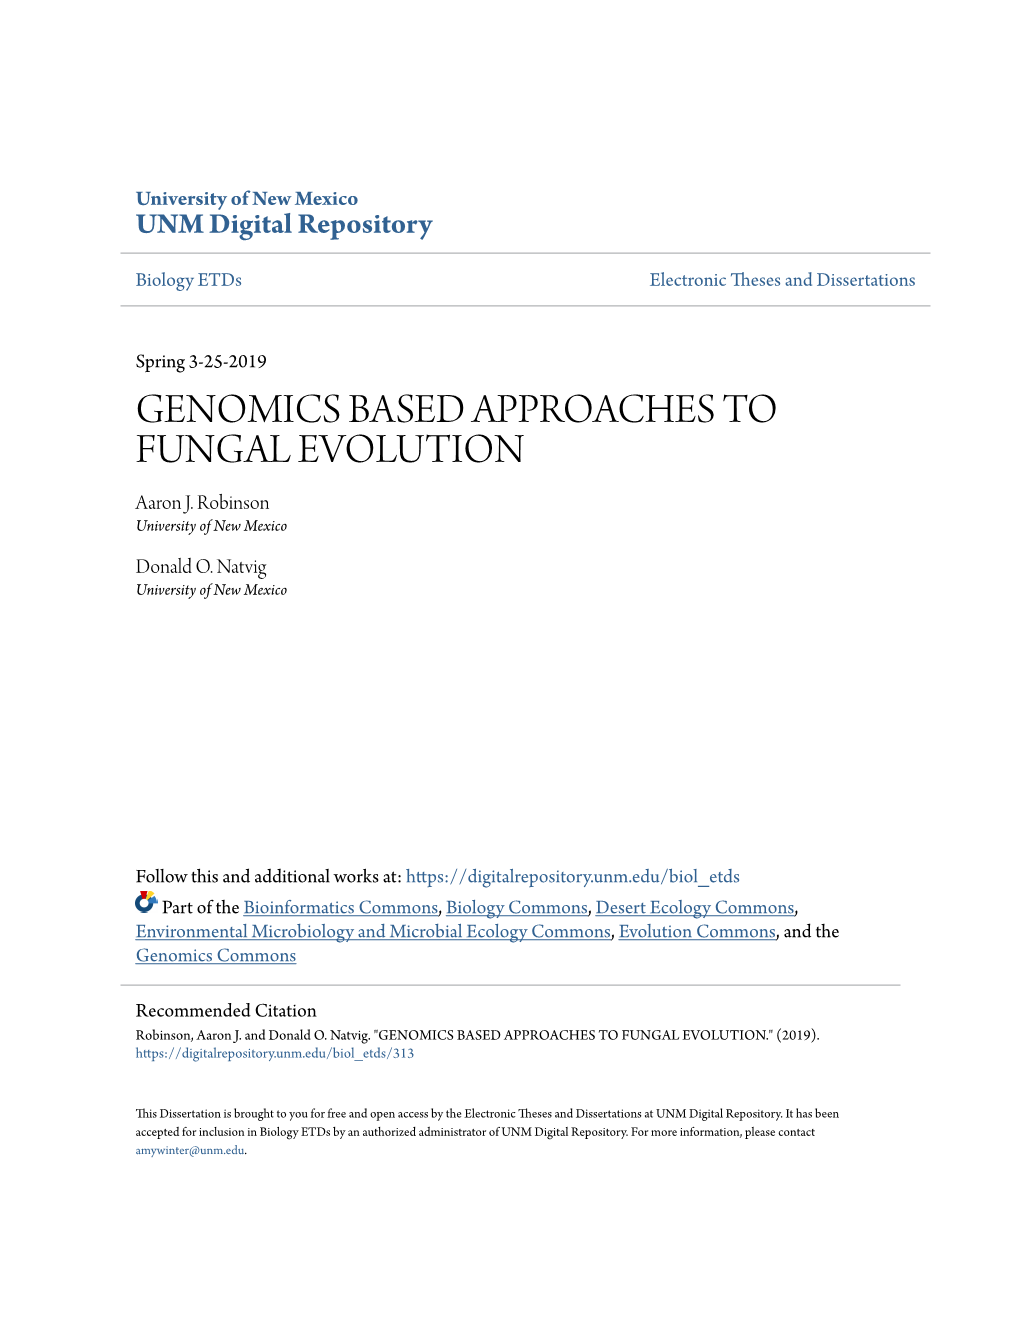 GENOMICS BASED APPROACHES to FUNGAL EVOLUTION Aaron J